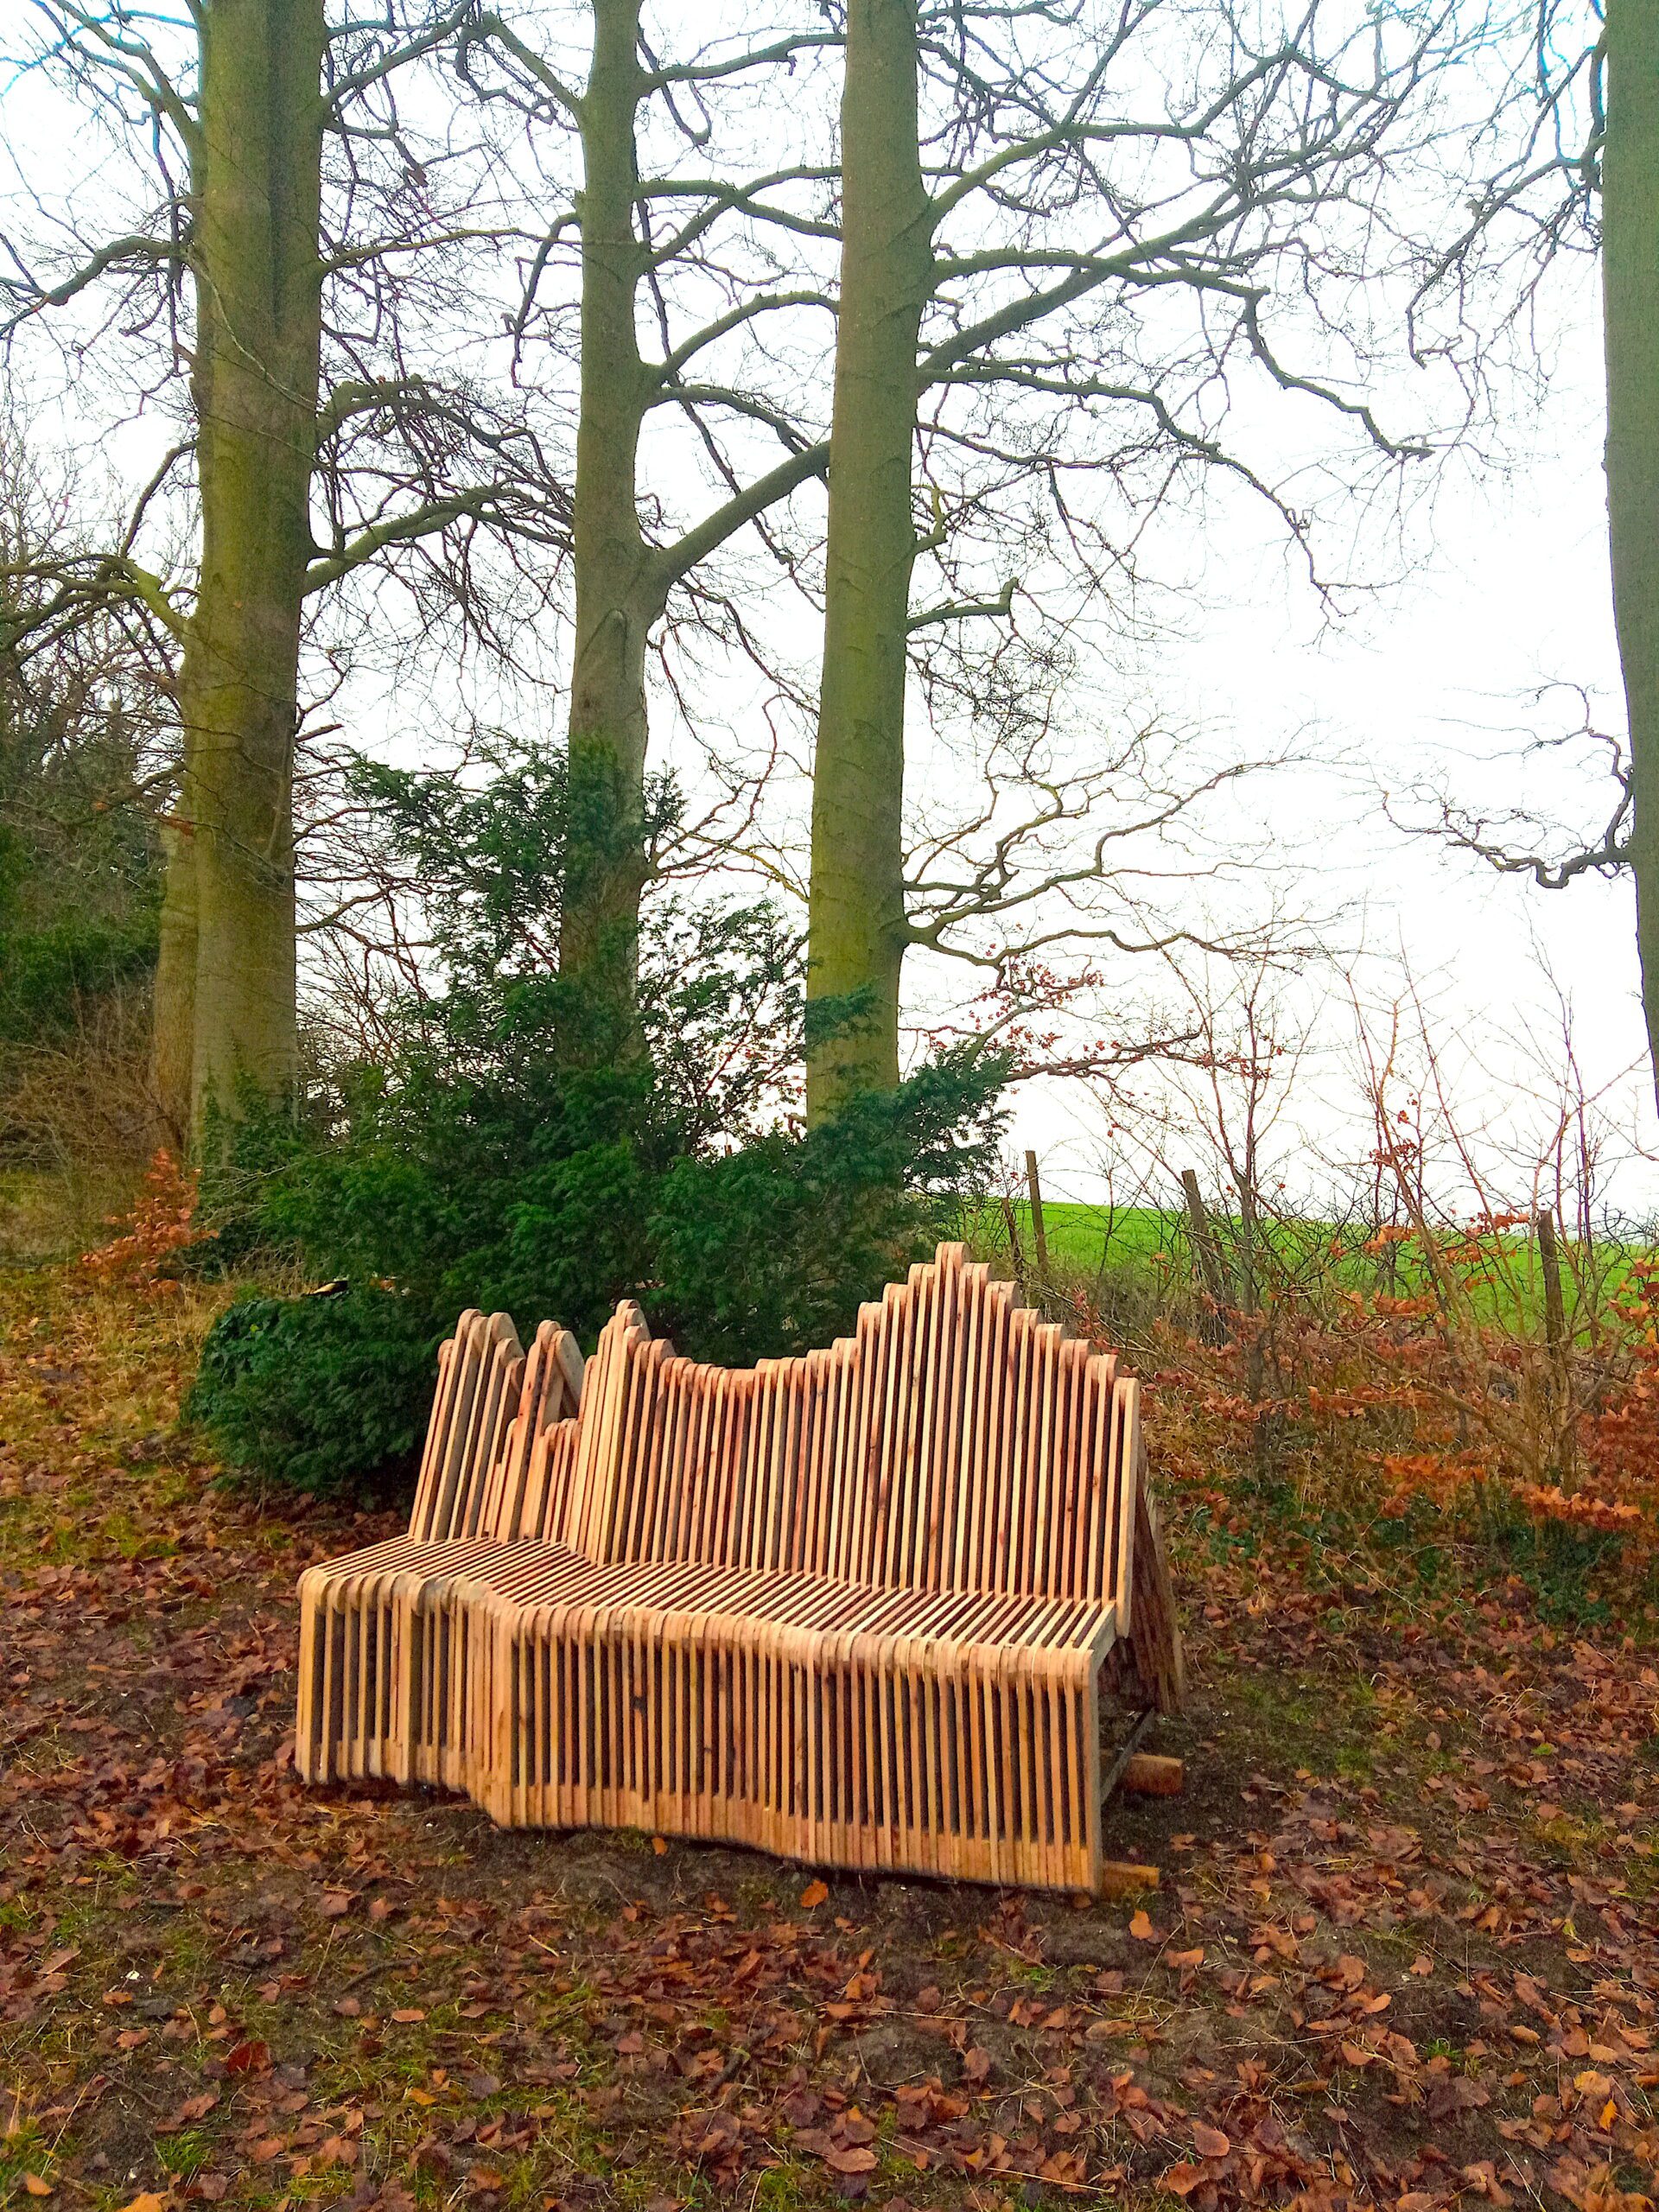 Feel Our Voice sculptured bench, surrounded with some trees and autumn leaves.